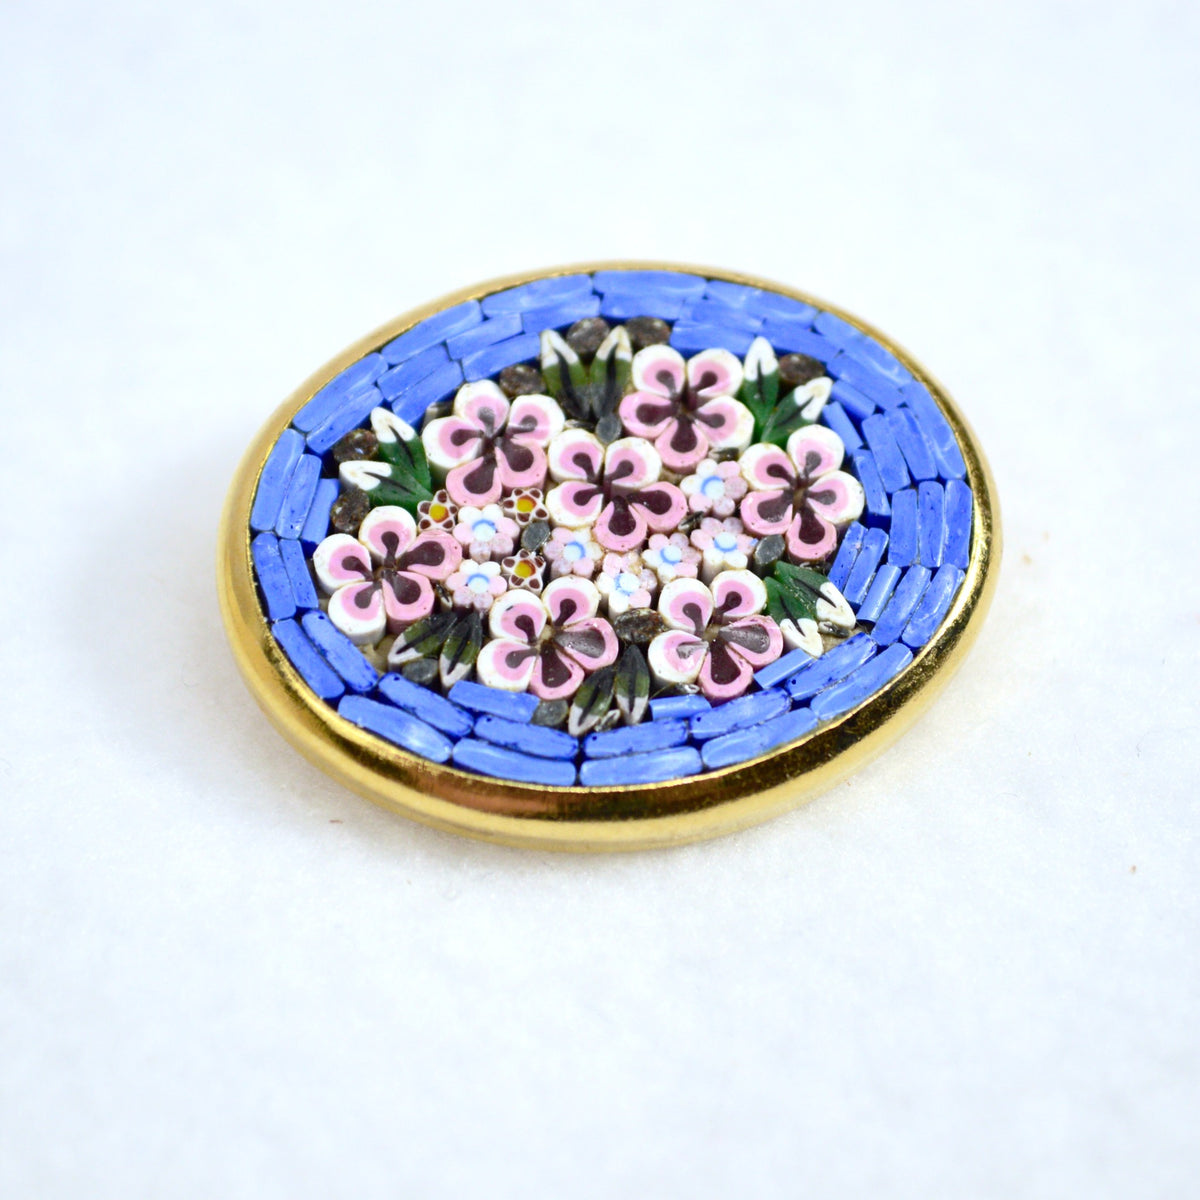 Florentine Mosaic Large Oval Brooch, Lapel Pin, Made in Italy - My Italian Decor